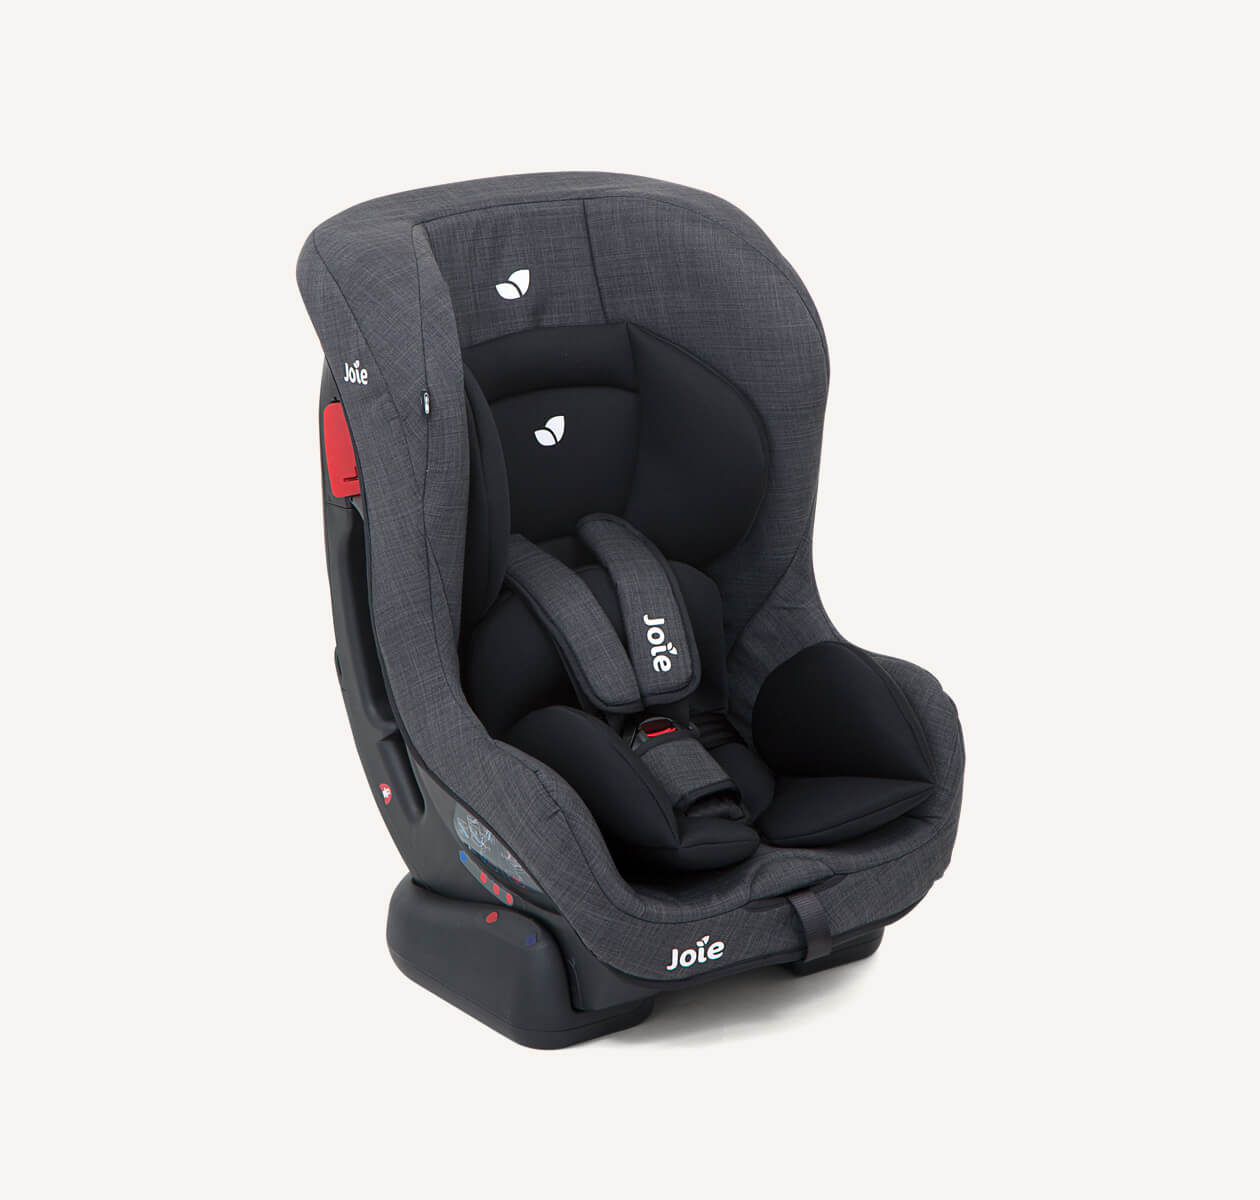 https://dd.joiebaby.com/media/catalog/product/p/1/p1-joie-toddler-car-seat-tilt-pavement-right-angle.jpg?type=product&height=265&width=265